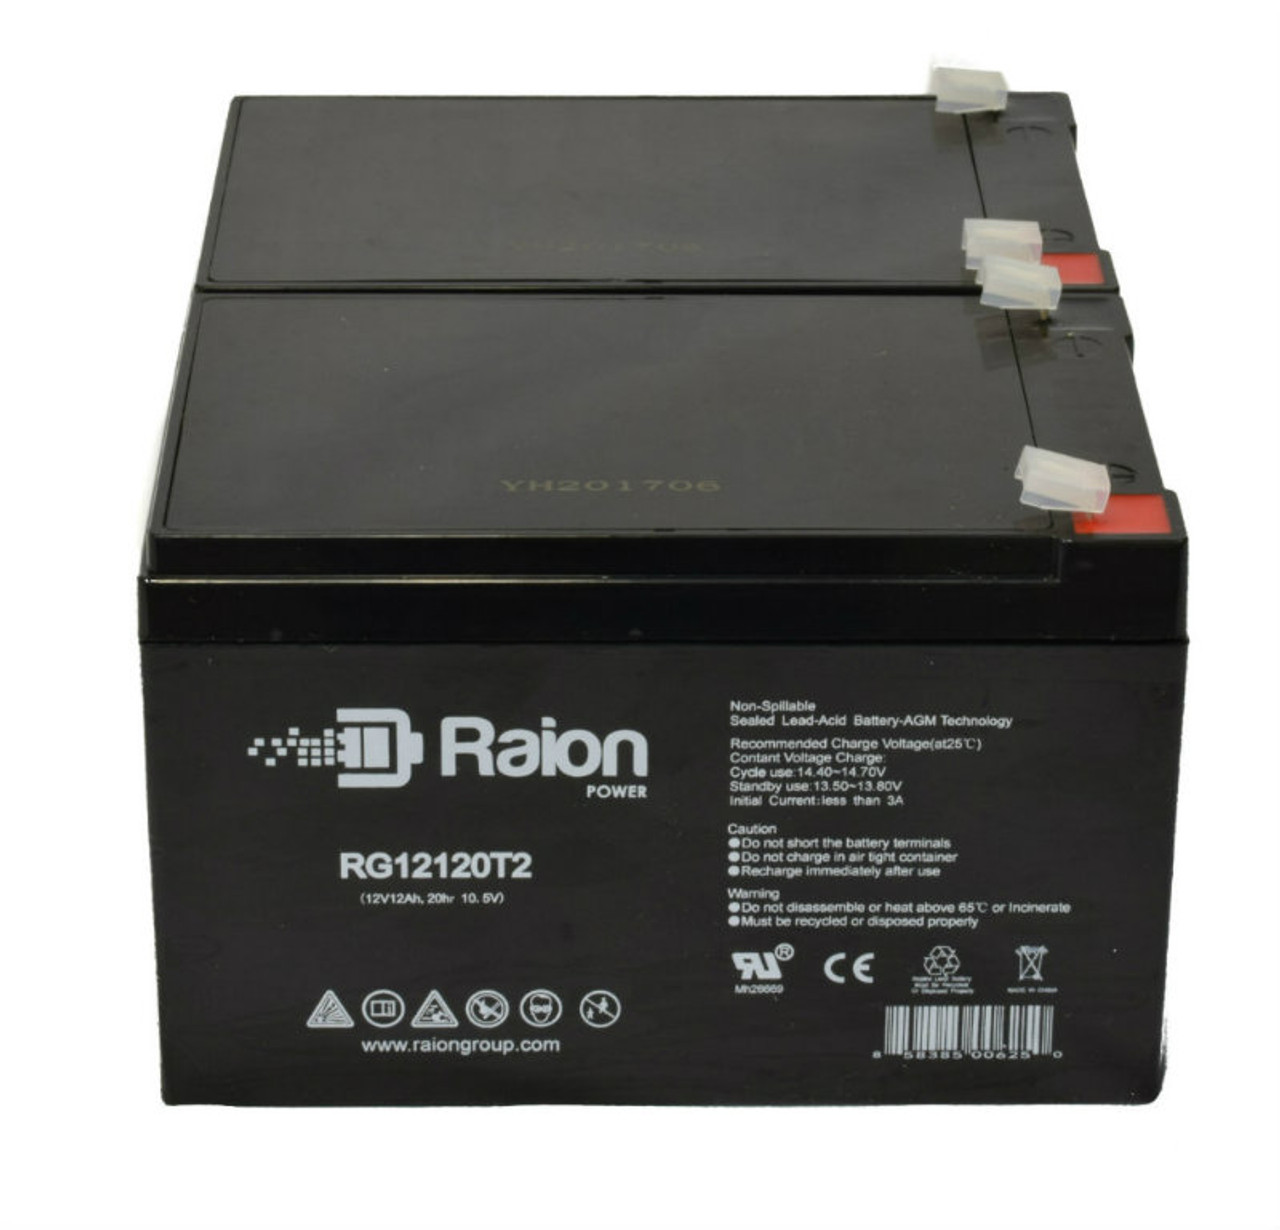 Raion Power 12V 12Ah Non-Spillable Compatible Replacement Battery for Energy Power EP-SLA12-10T2 - (2 Pack)